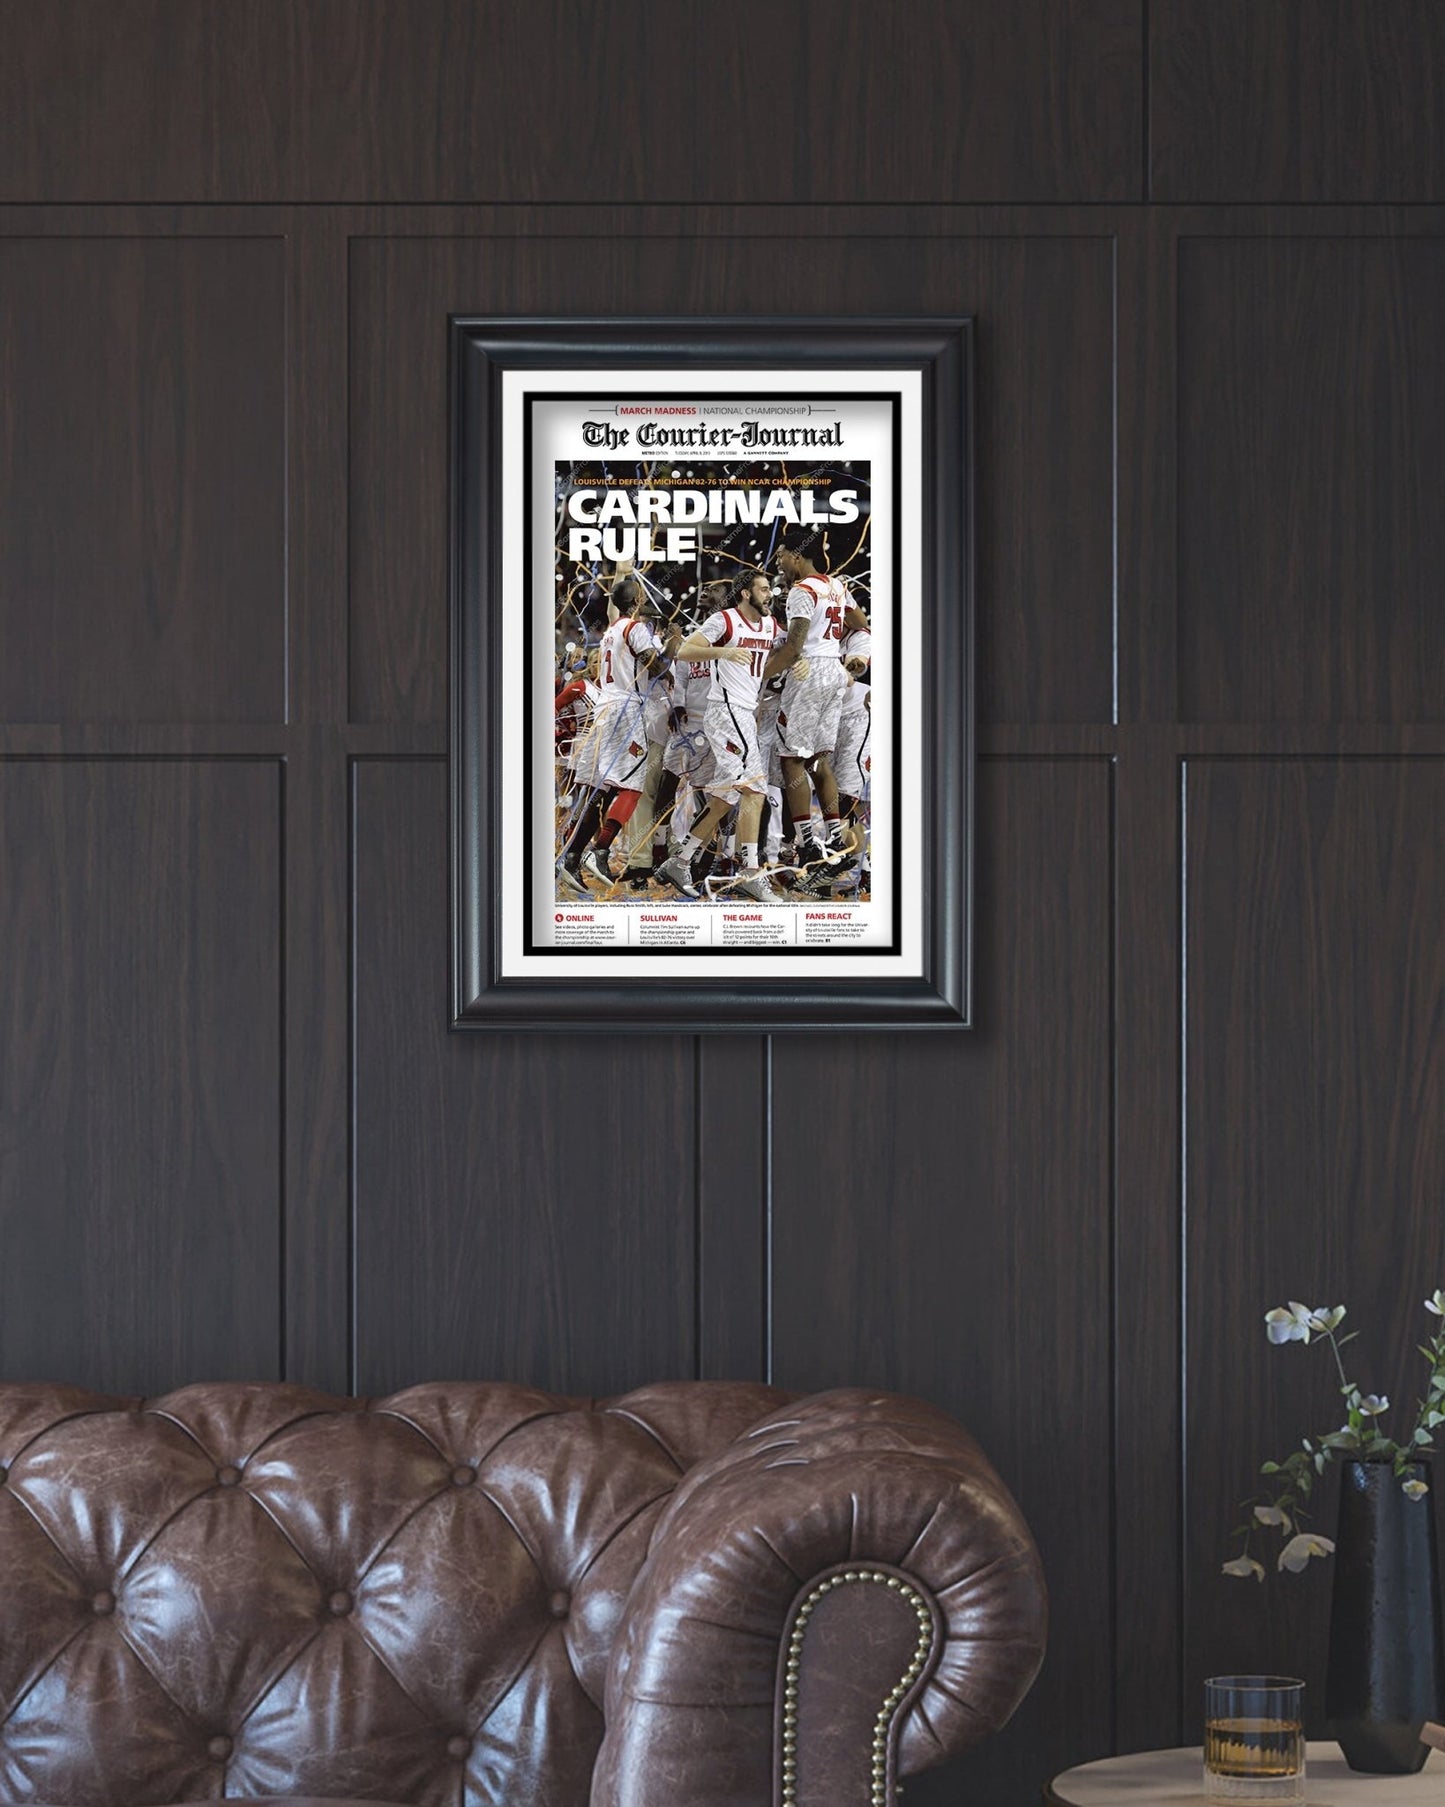 2013 Louisville Cardinals NCAA College Men’s Basketball Champions Framed Front Page Newspaper Print - Title Game Frames